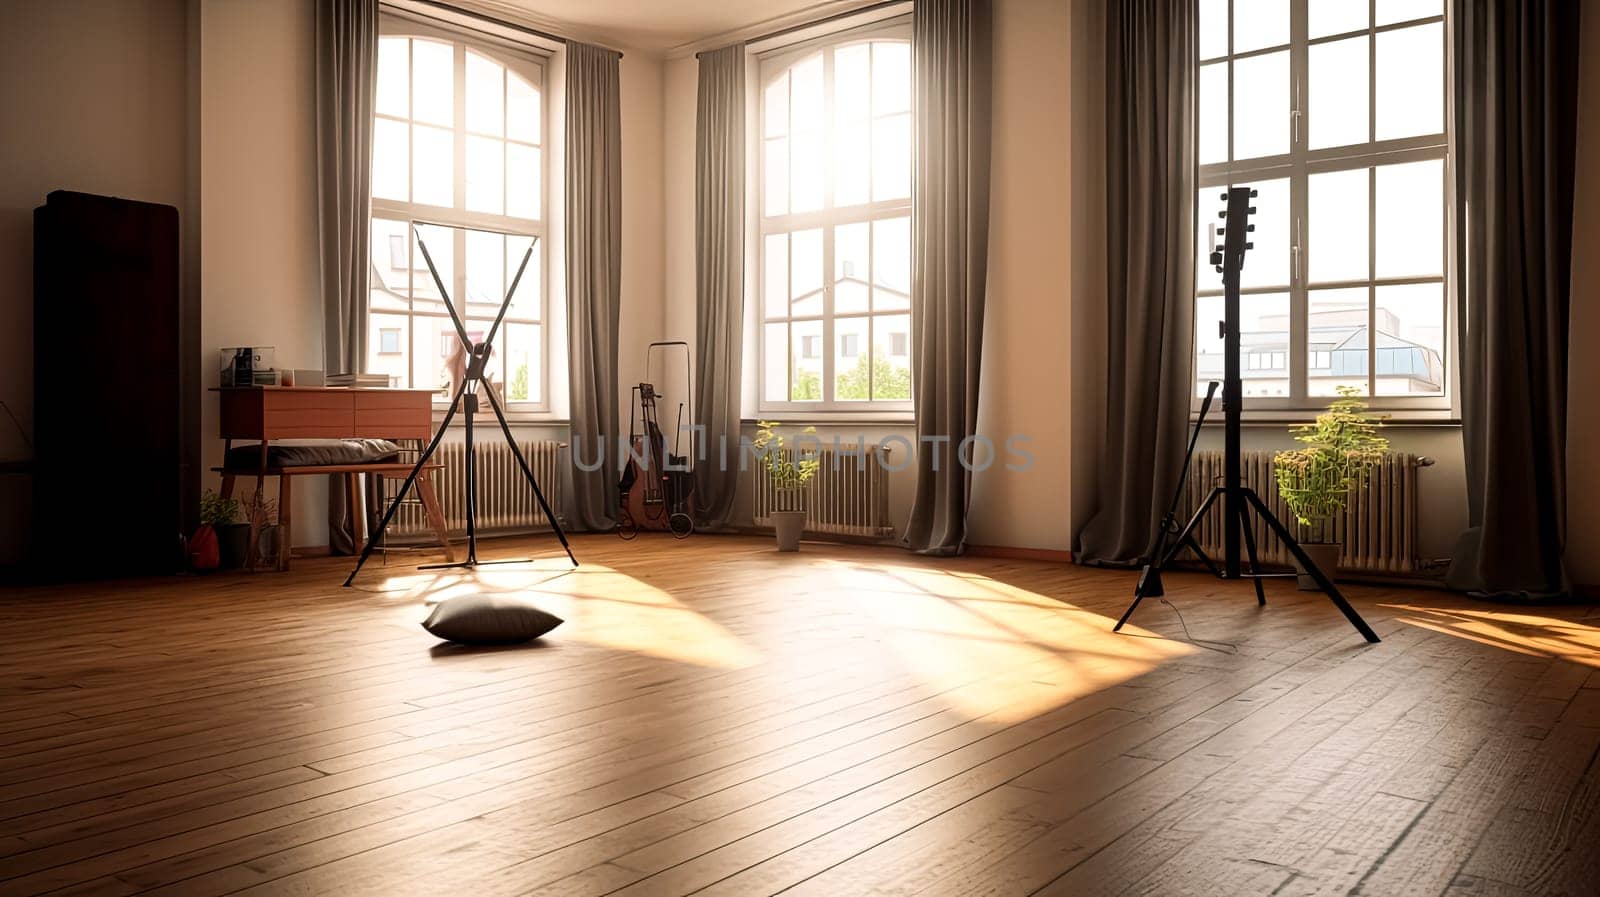 A room with a guitar, a microphone, and a camera. The room is bright and sunny, and there are two people in the room